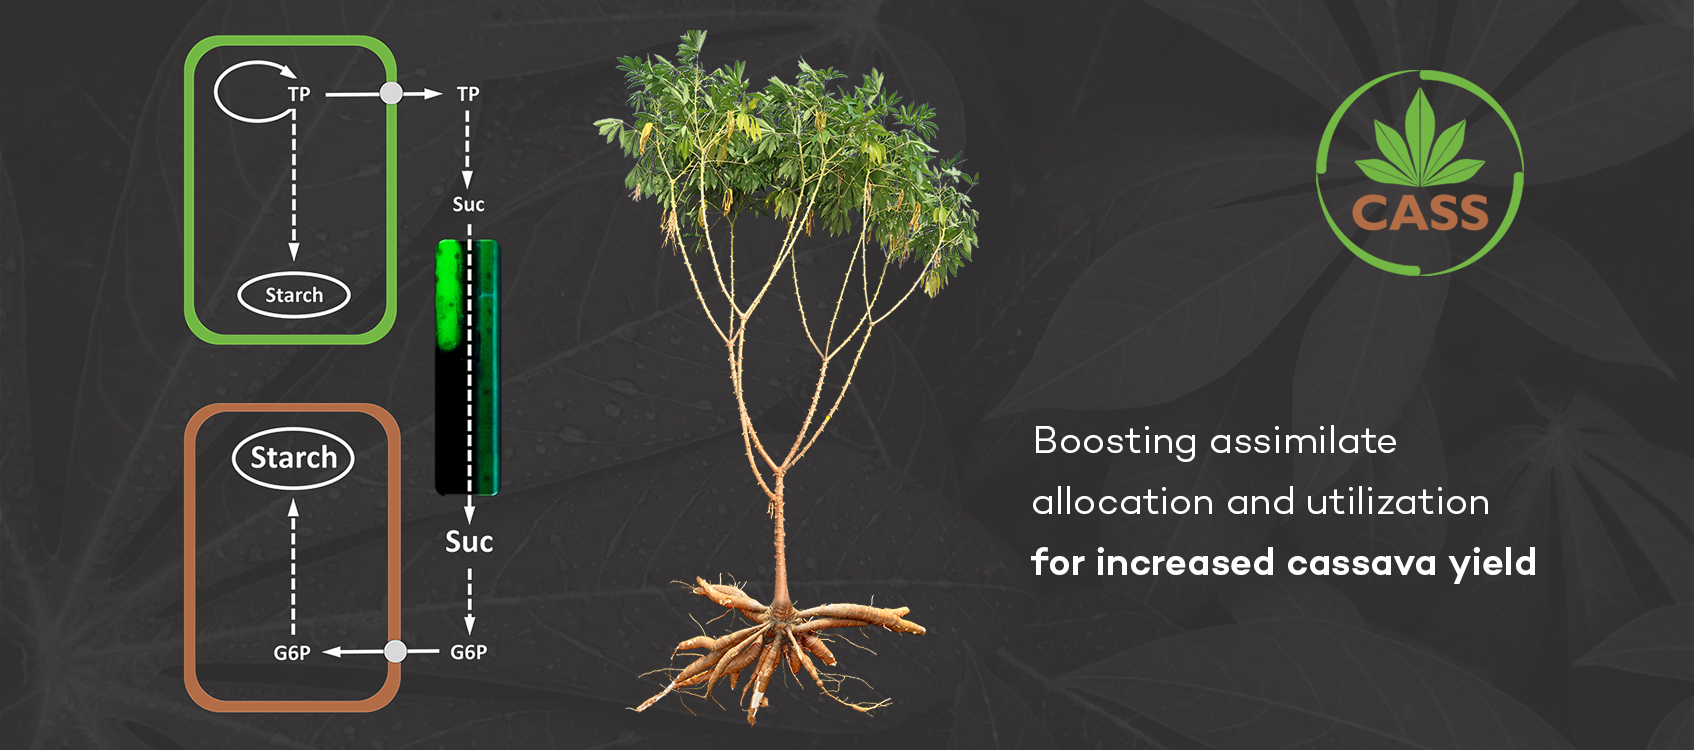 CASS logo superimposed atop a diagram showing how it increases a cassava plant's efficiency in converting CO2 to sugar. Caption: Boosting assimilate allocation and utilization for increased cassava yield.